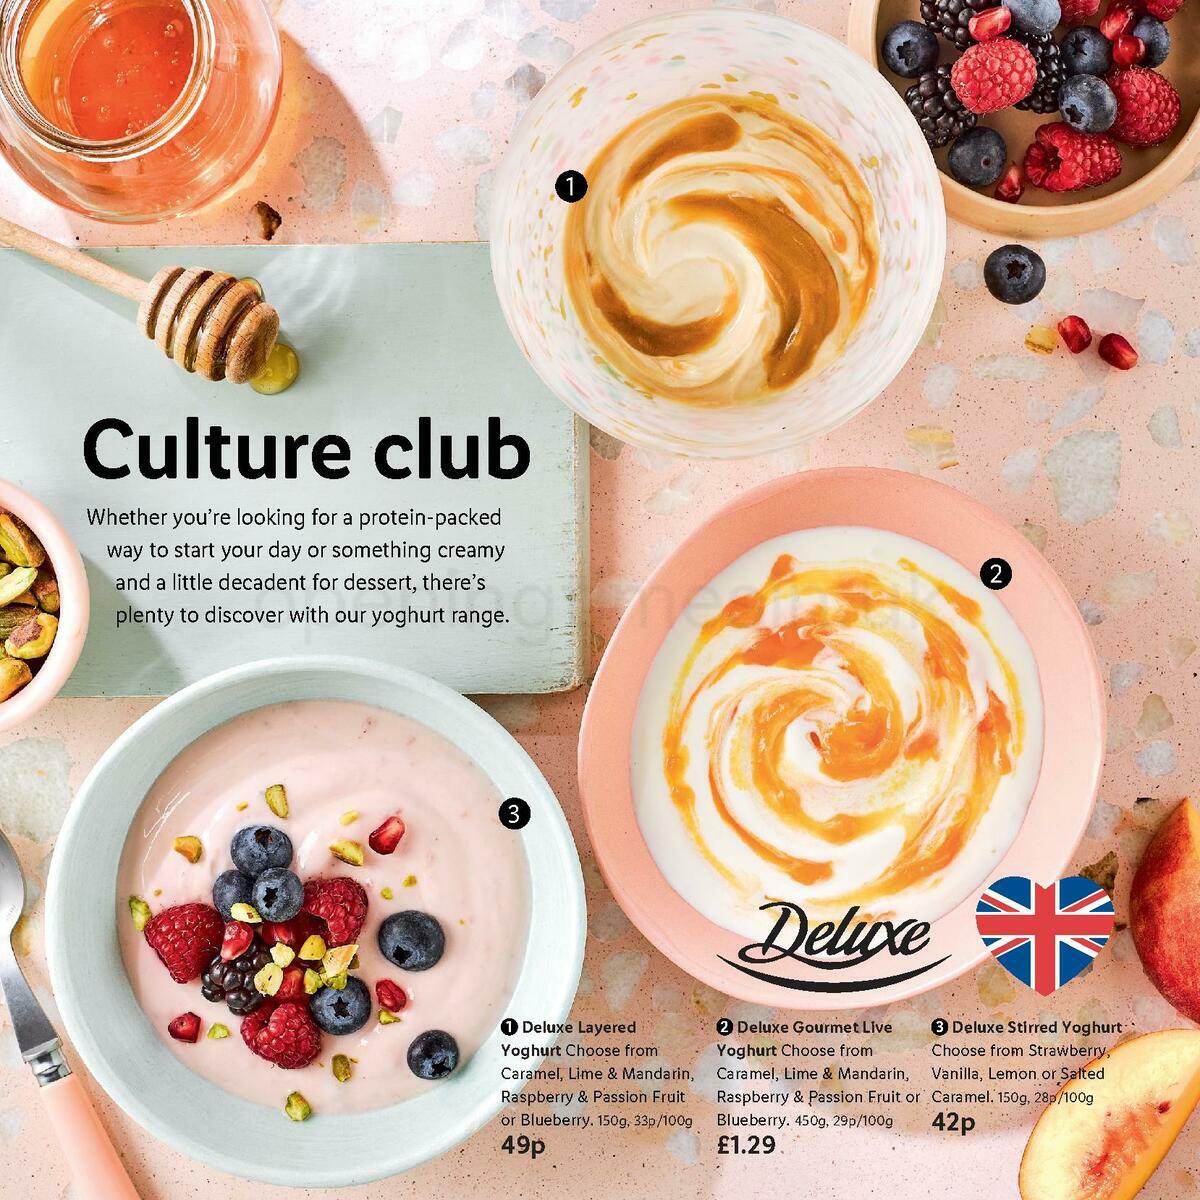 LIDL Magazine Scotland Offers from 10 May